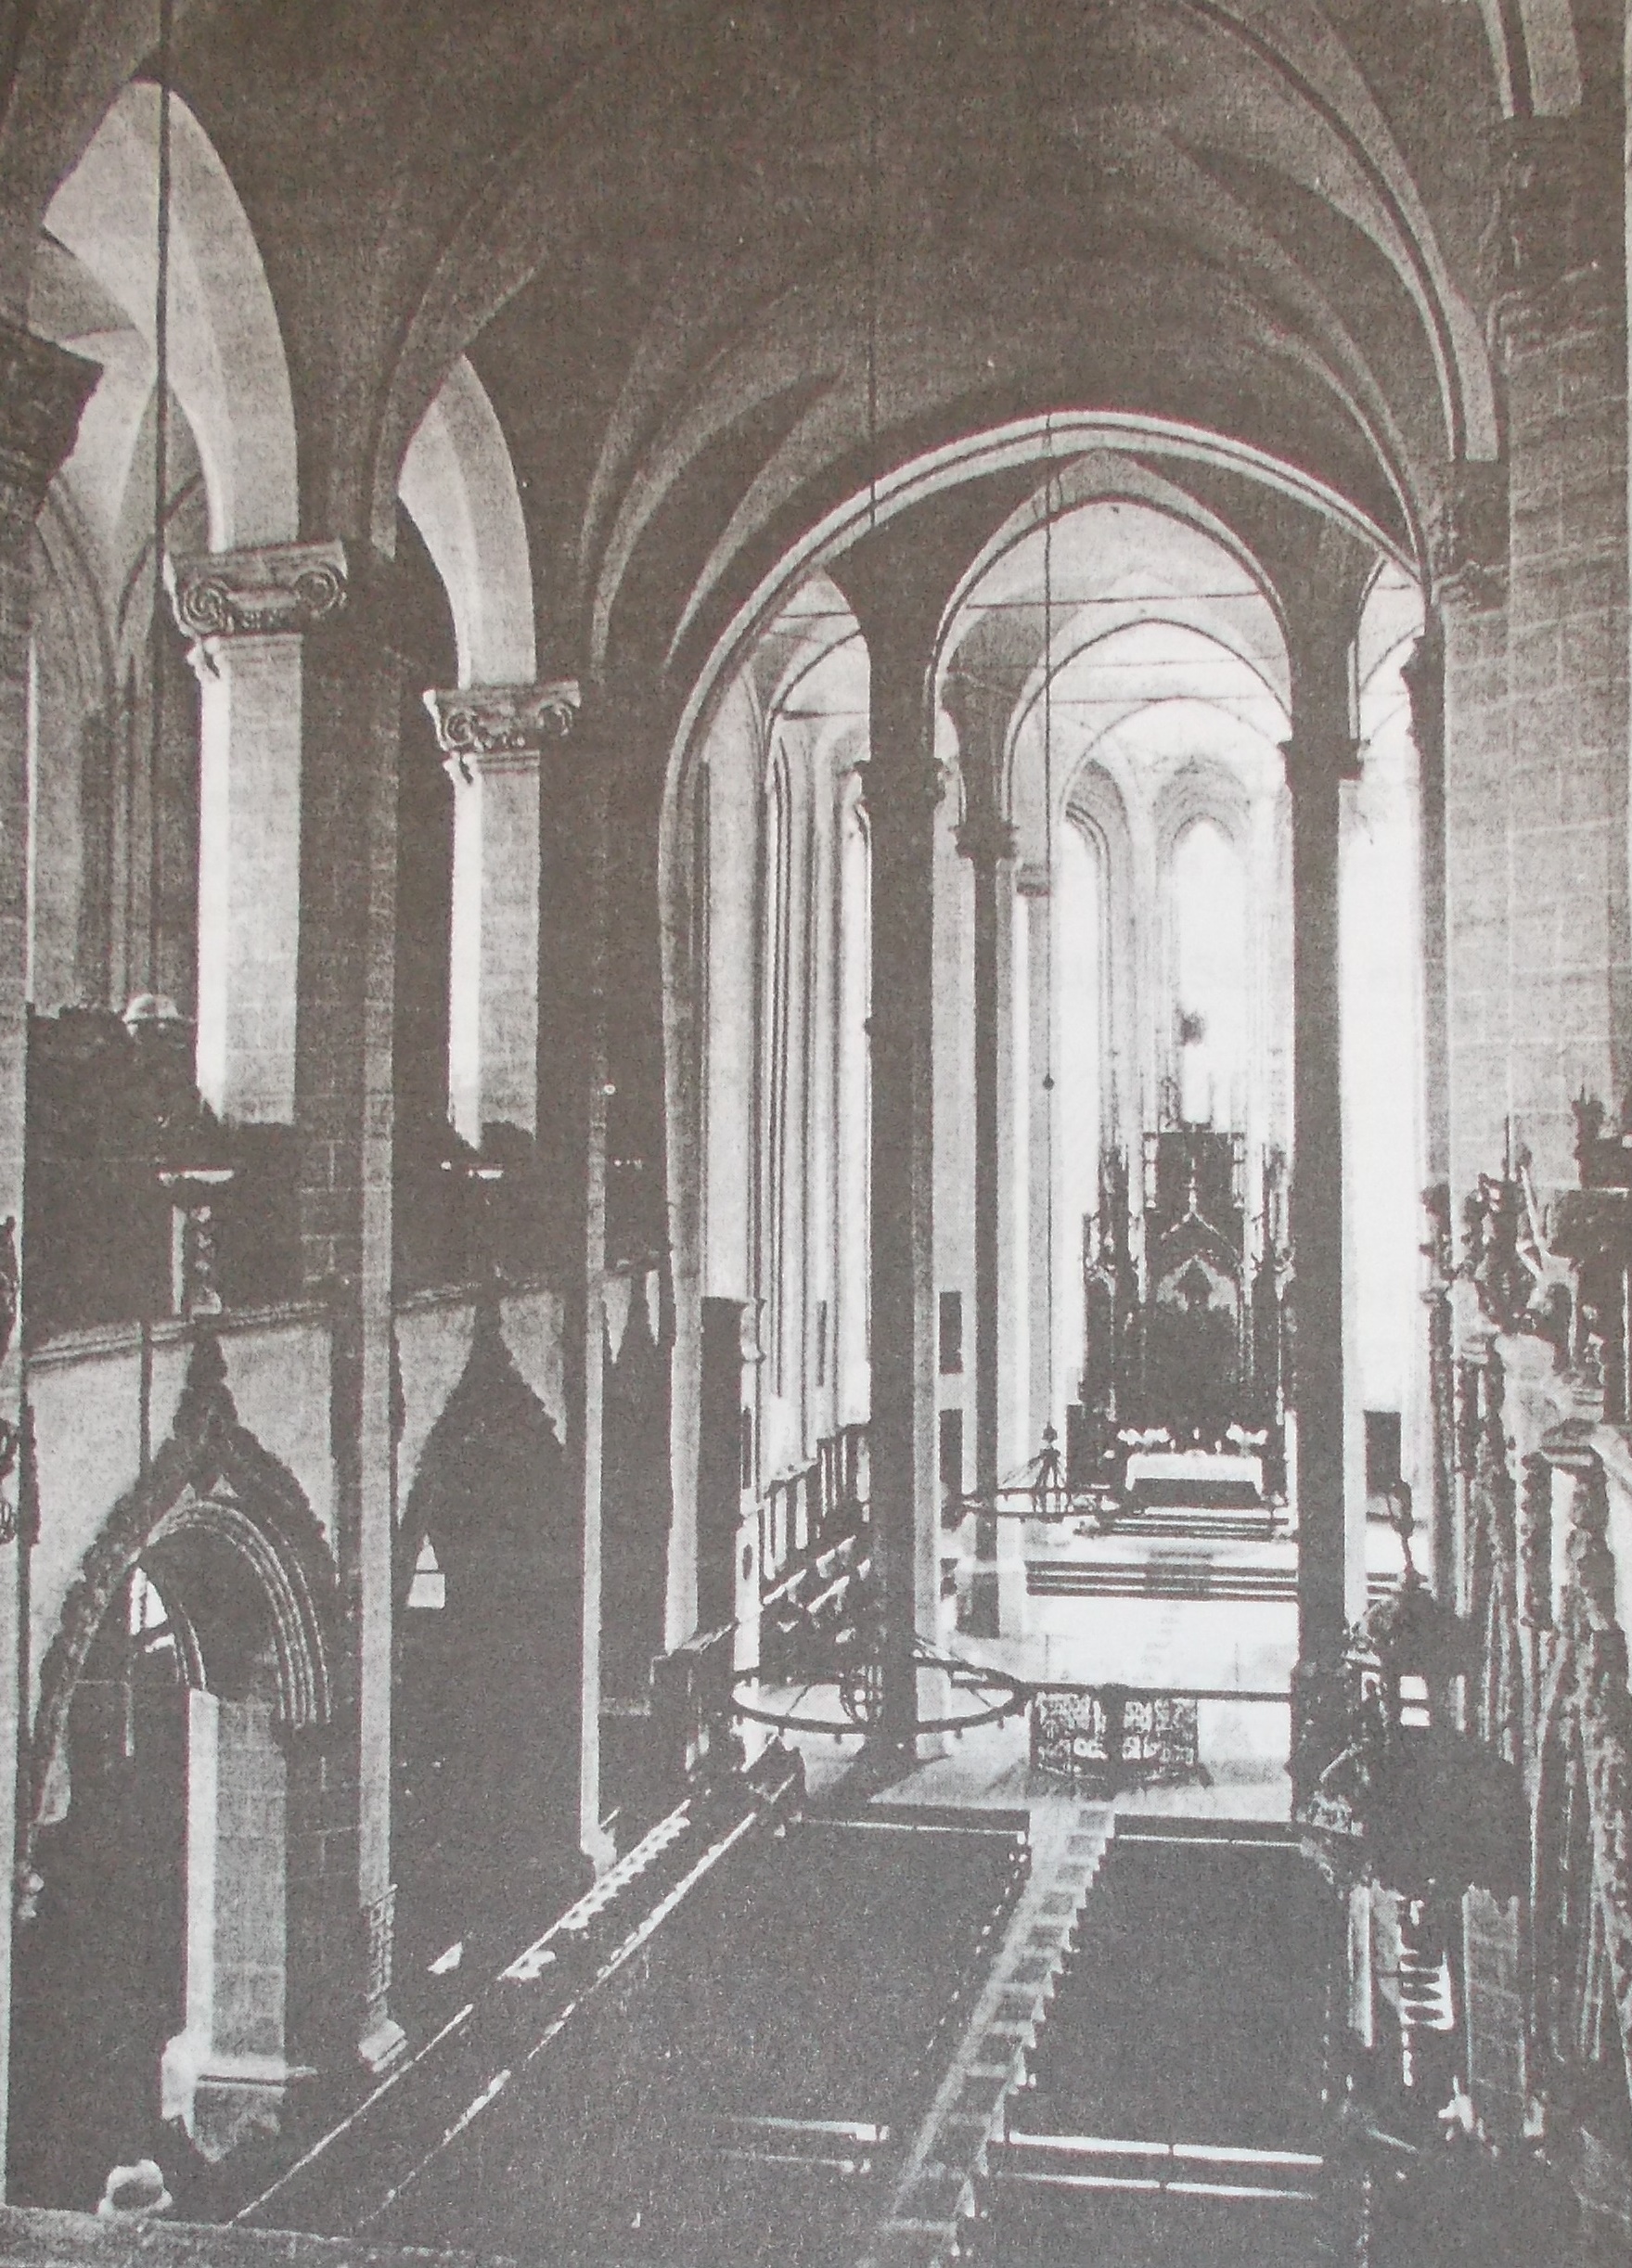 The interior of the Black Church after renovation during the late 1980 (unknown author)